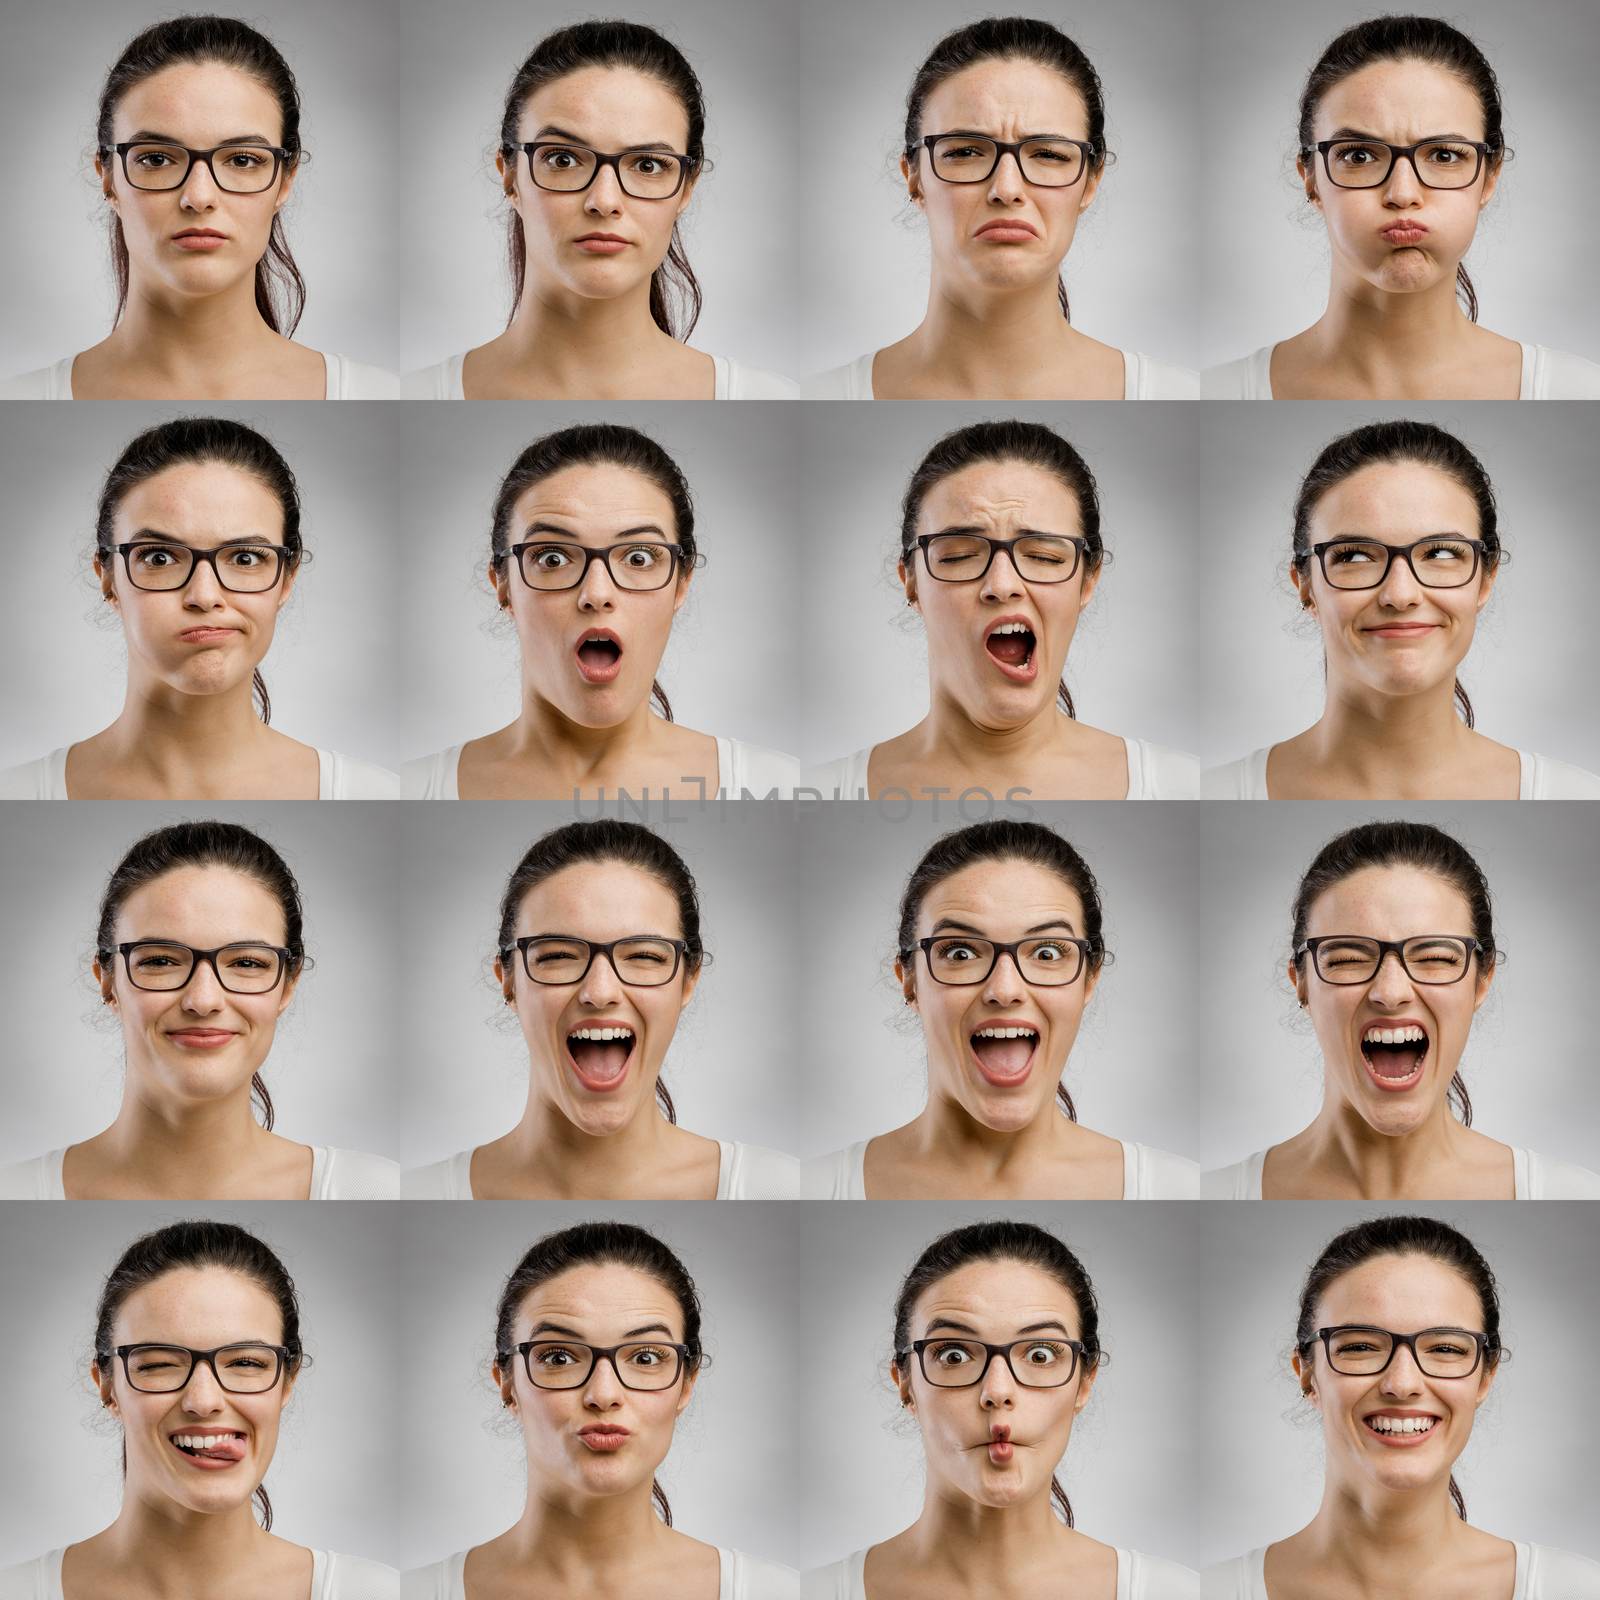 Multiple portraits of the same woman making diferent expressions